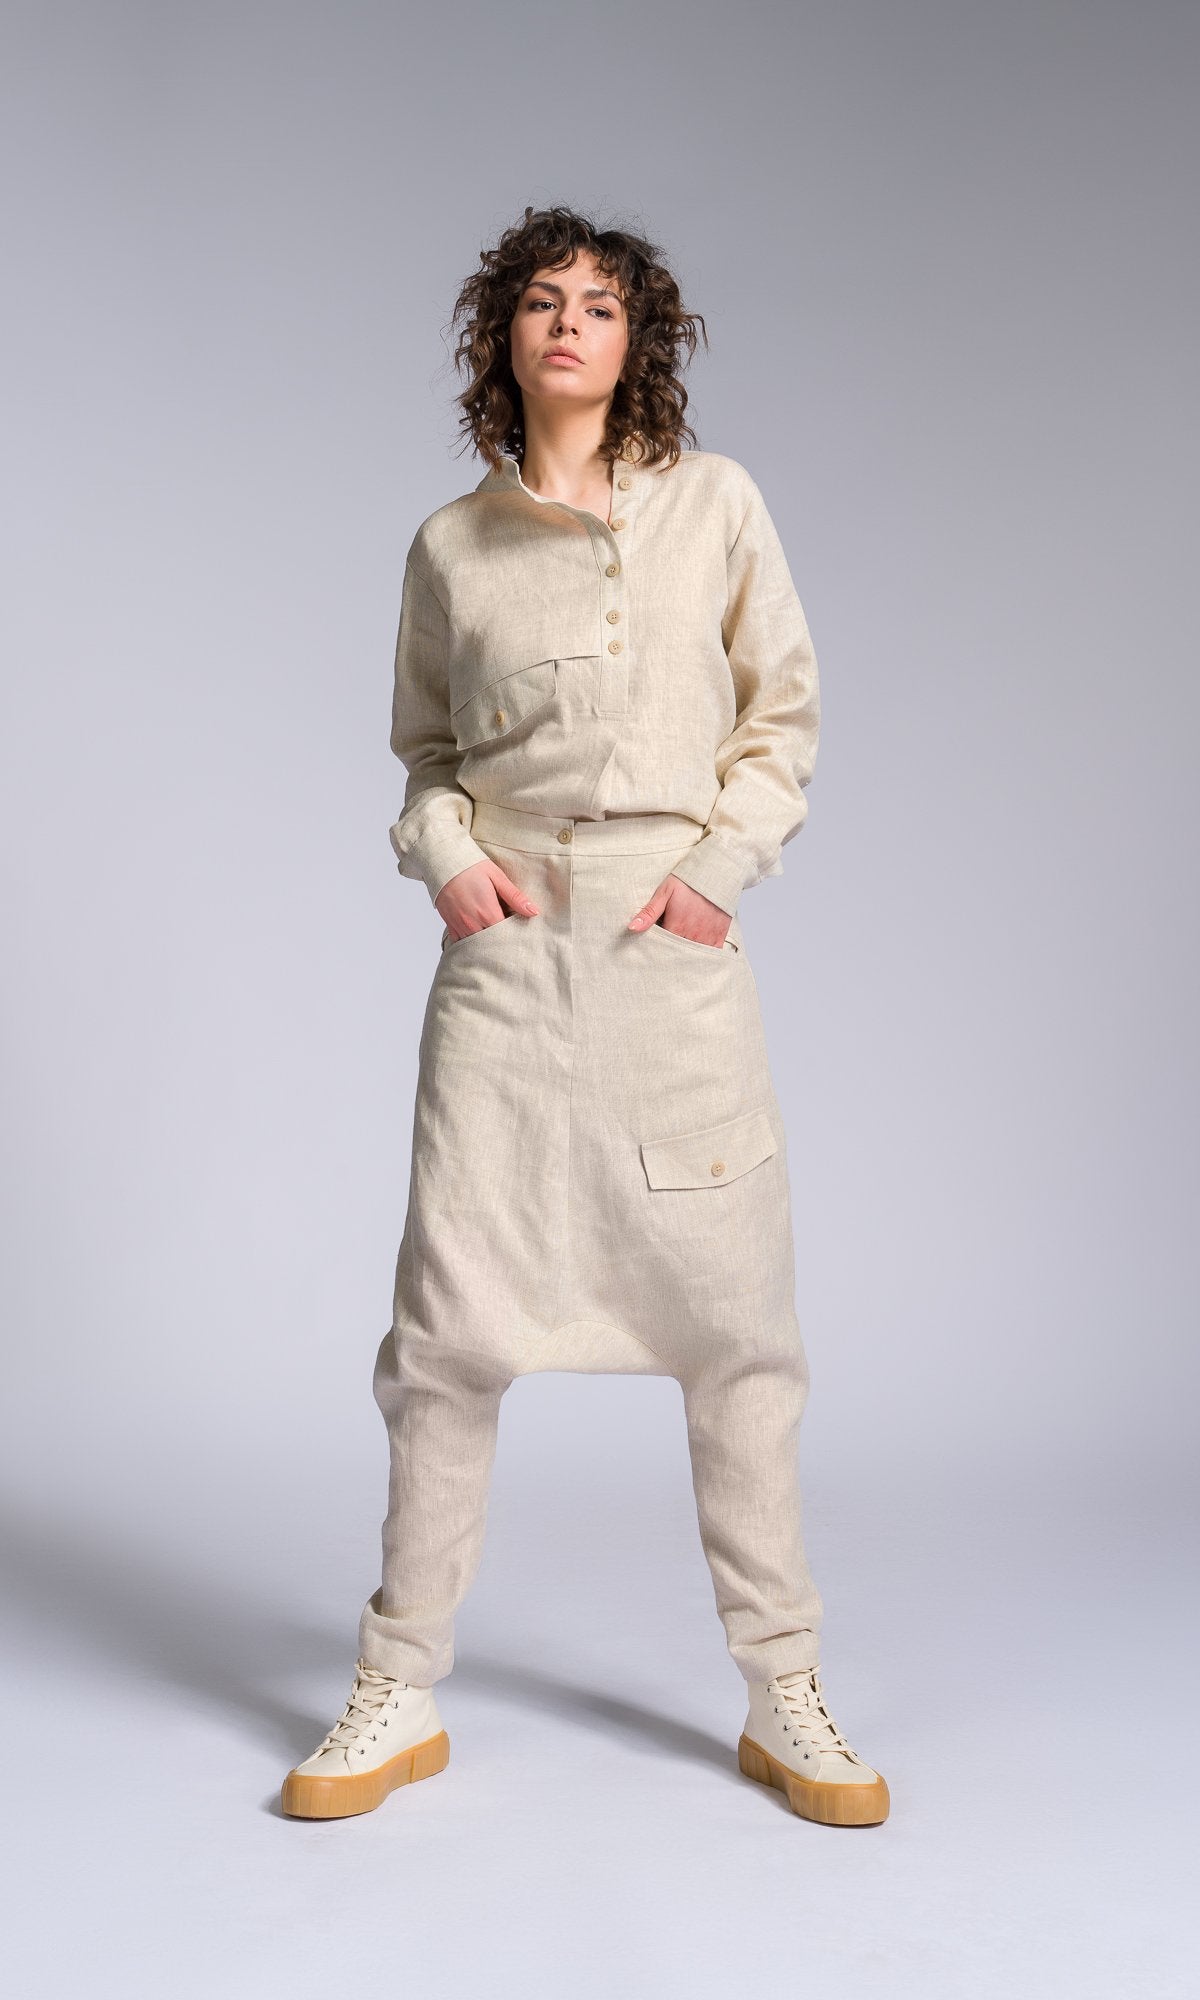 Two-piece Set of Linen Shirt and Pants with Decorative Flap Pockets